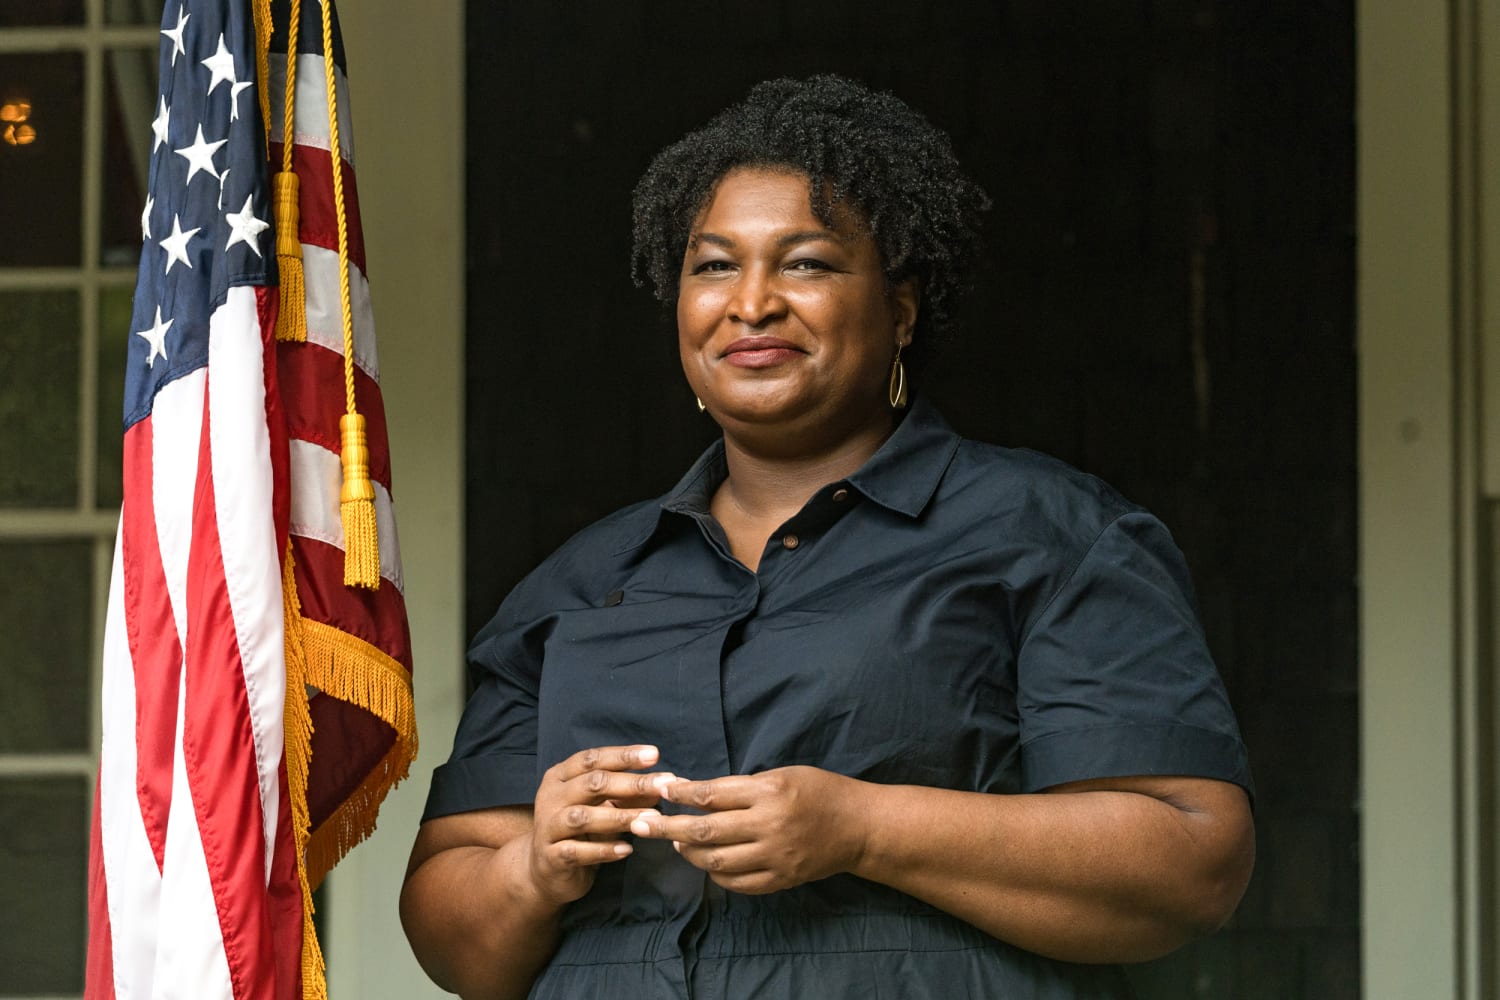 Stacey Abrams calls Georgia 'essential' to Democrats keeping control of Congress in midterms